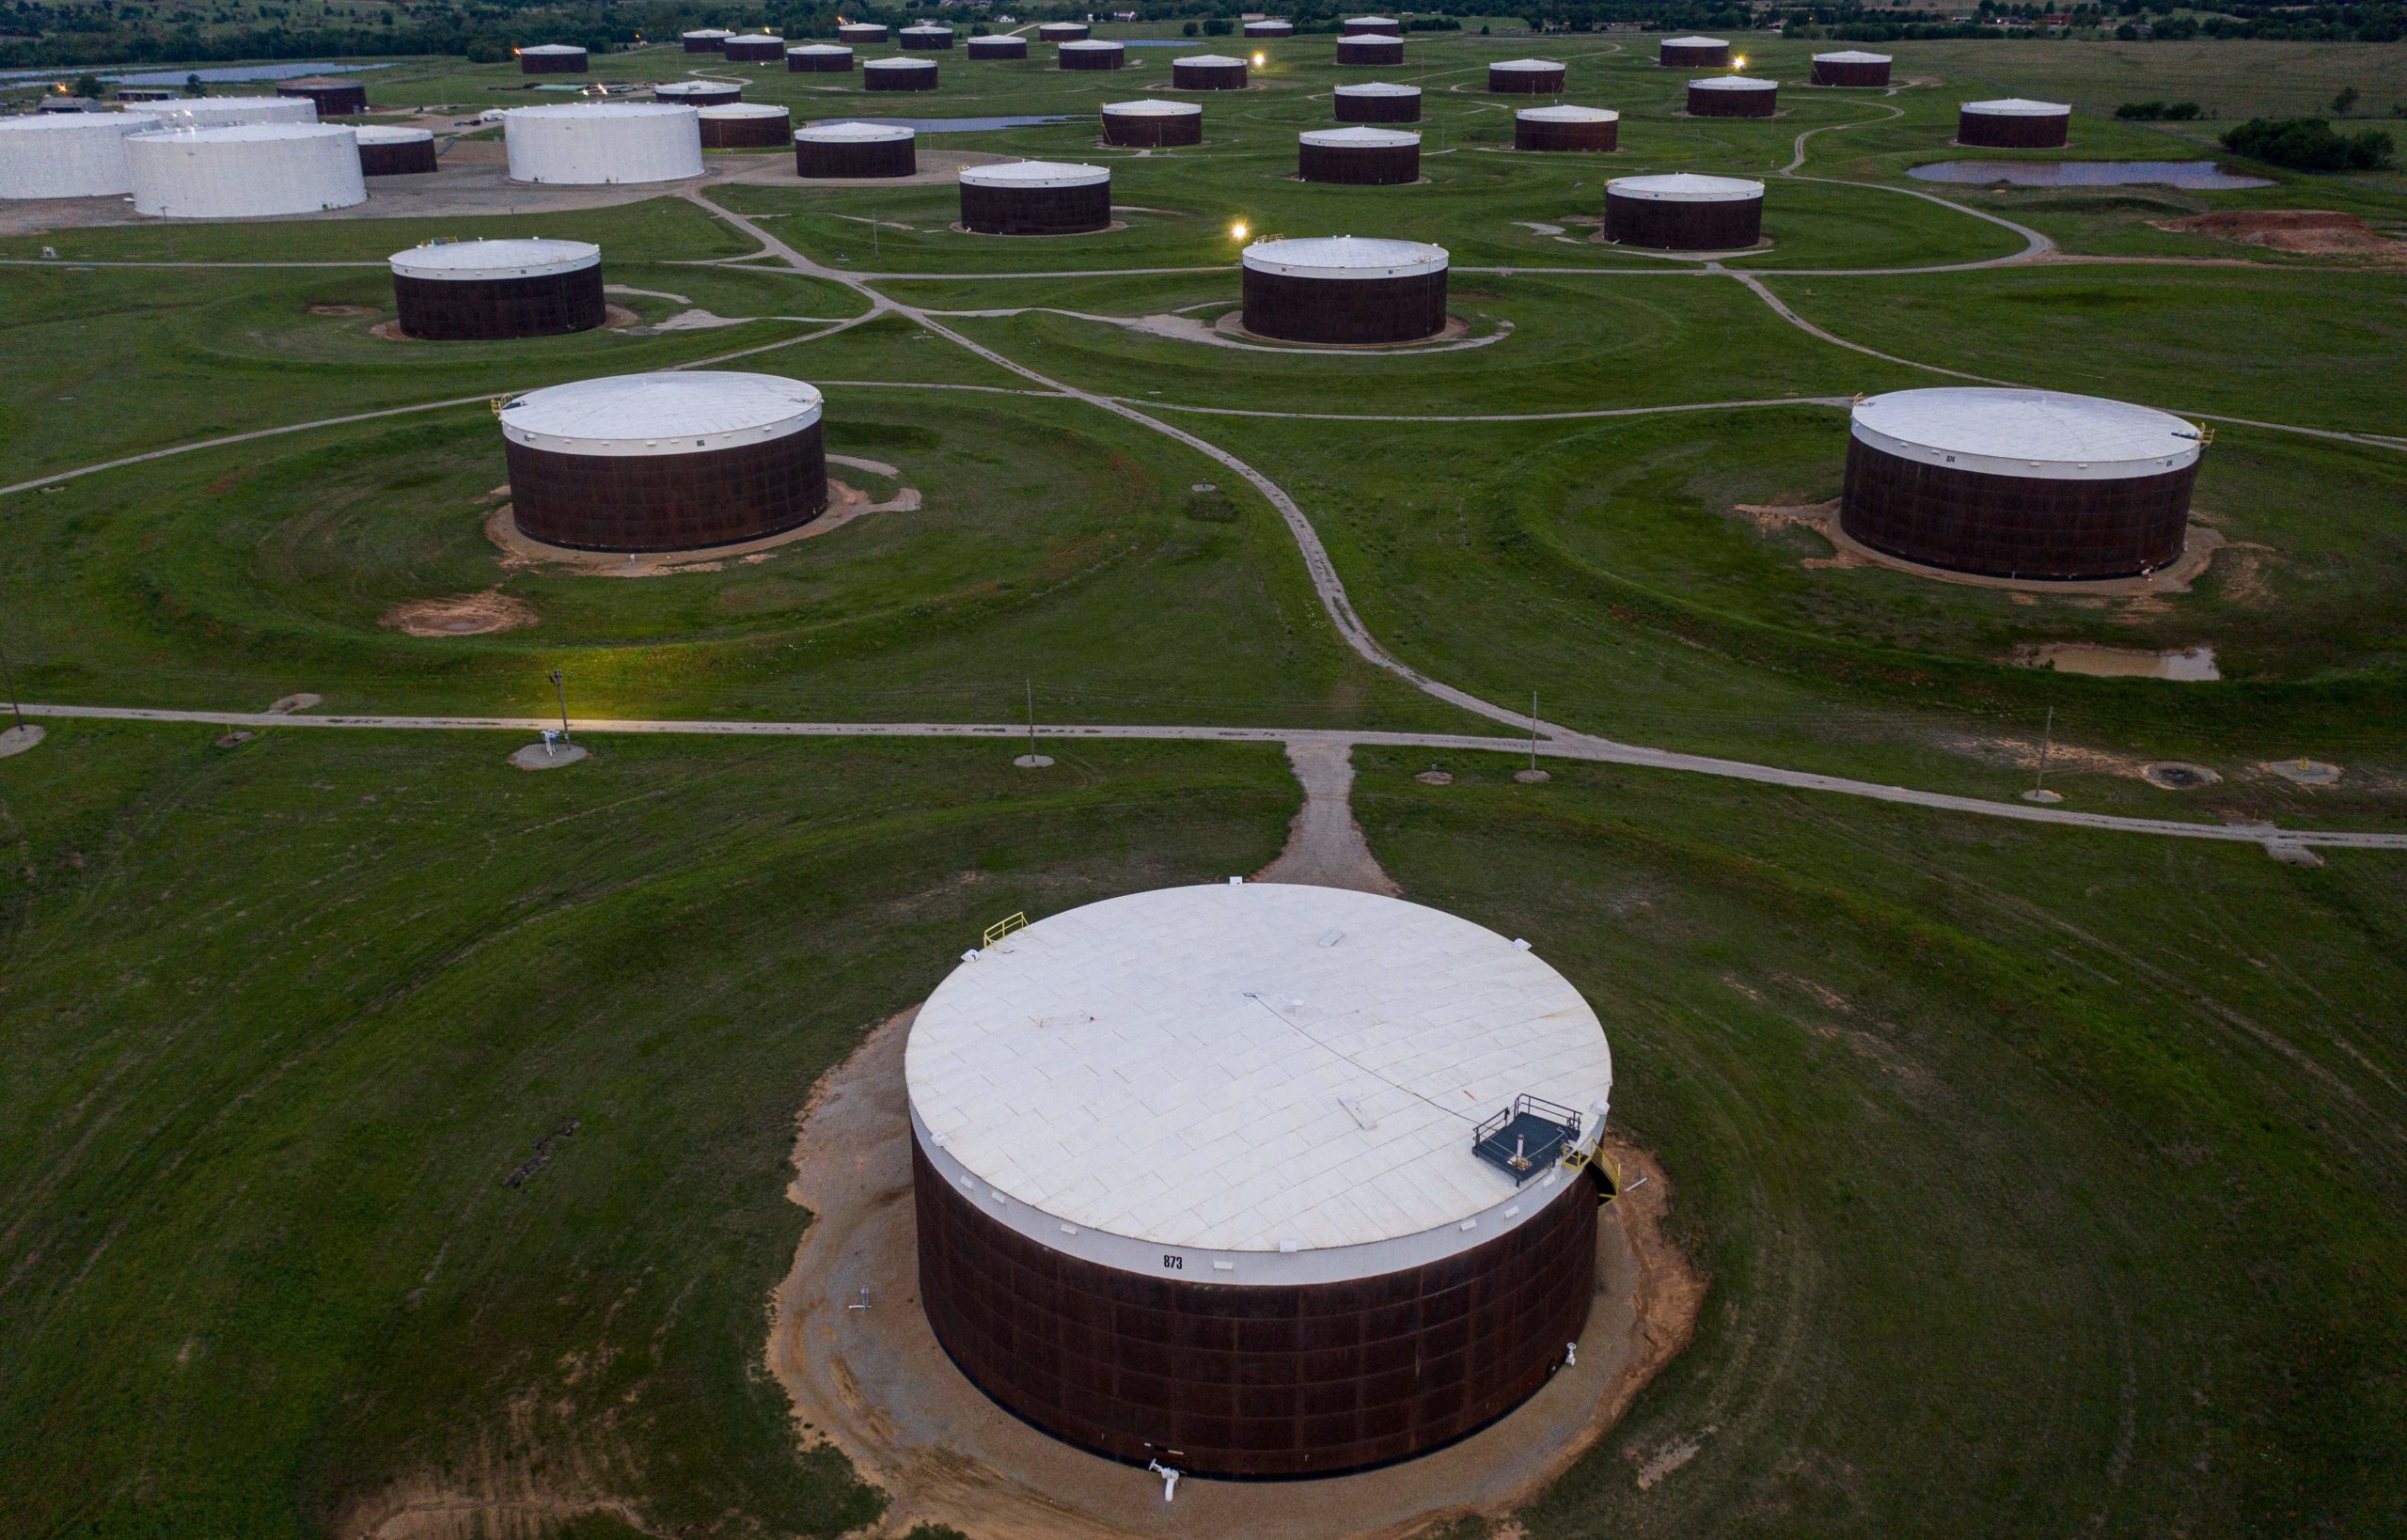 An aerial view of a crude oil storage facility is seen on May 5, 2020 in Cushing, Oklahoma. (Johannes Eisele/AFP via Getty Images)